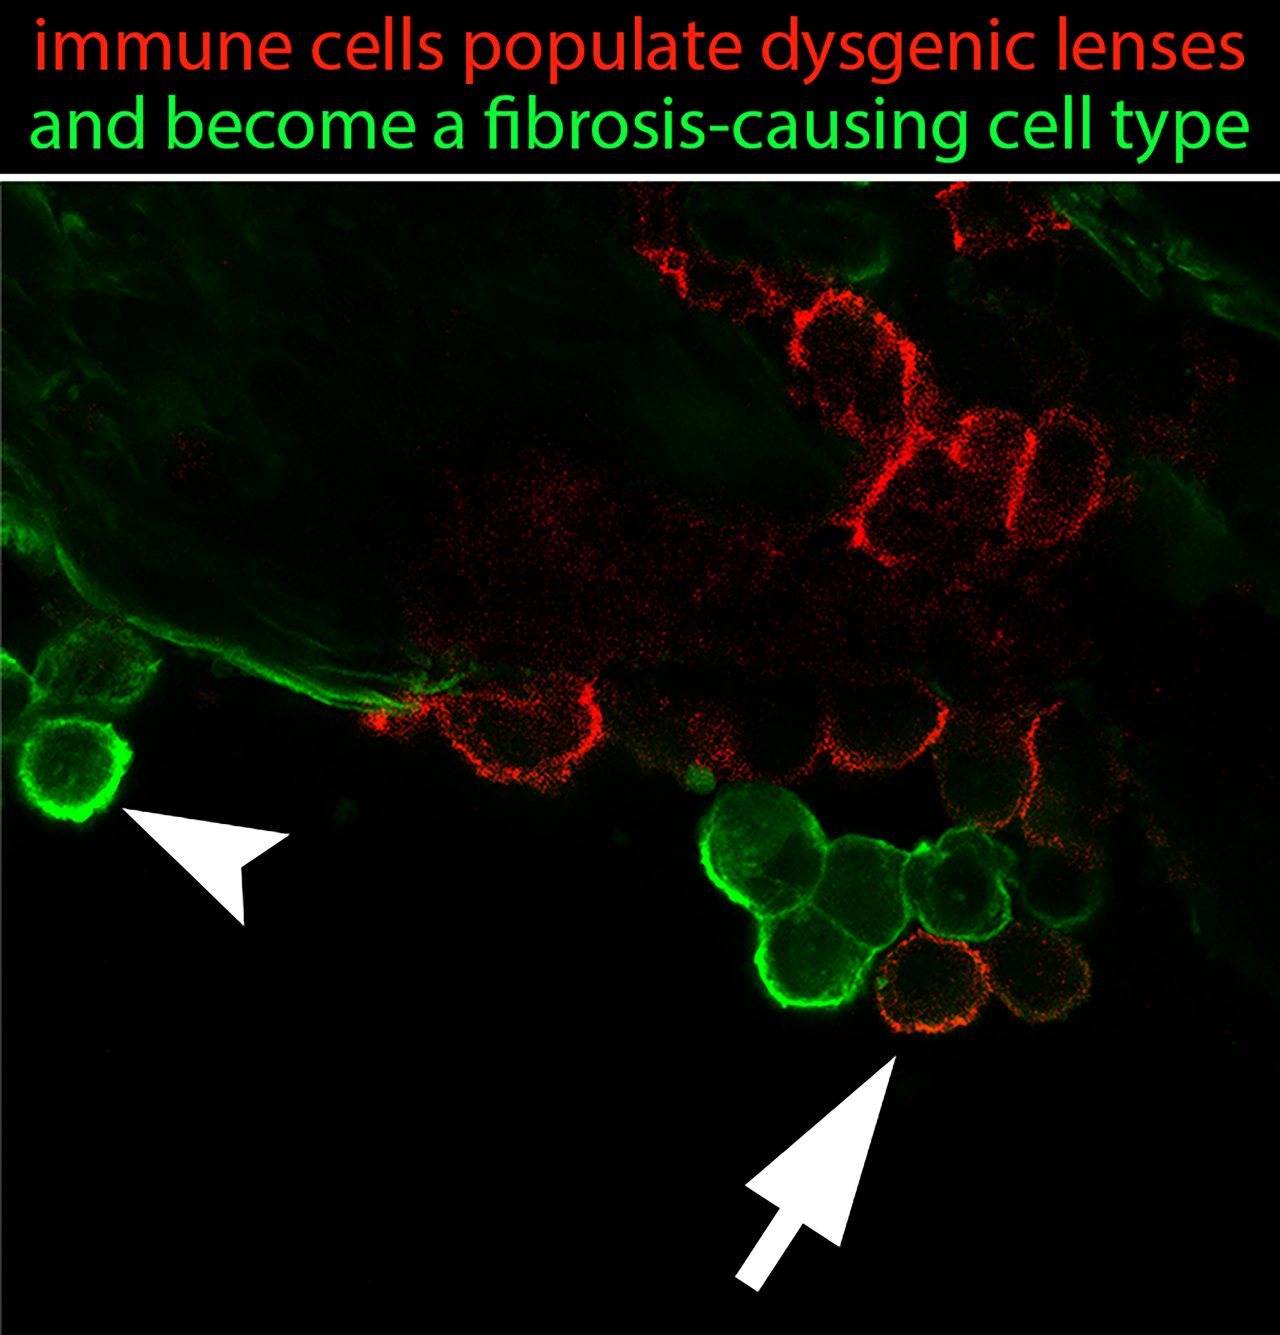 project 2 -  immune cells populate dysgenic lenses and become a fibrosis-causing cell type